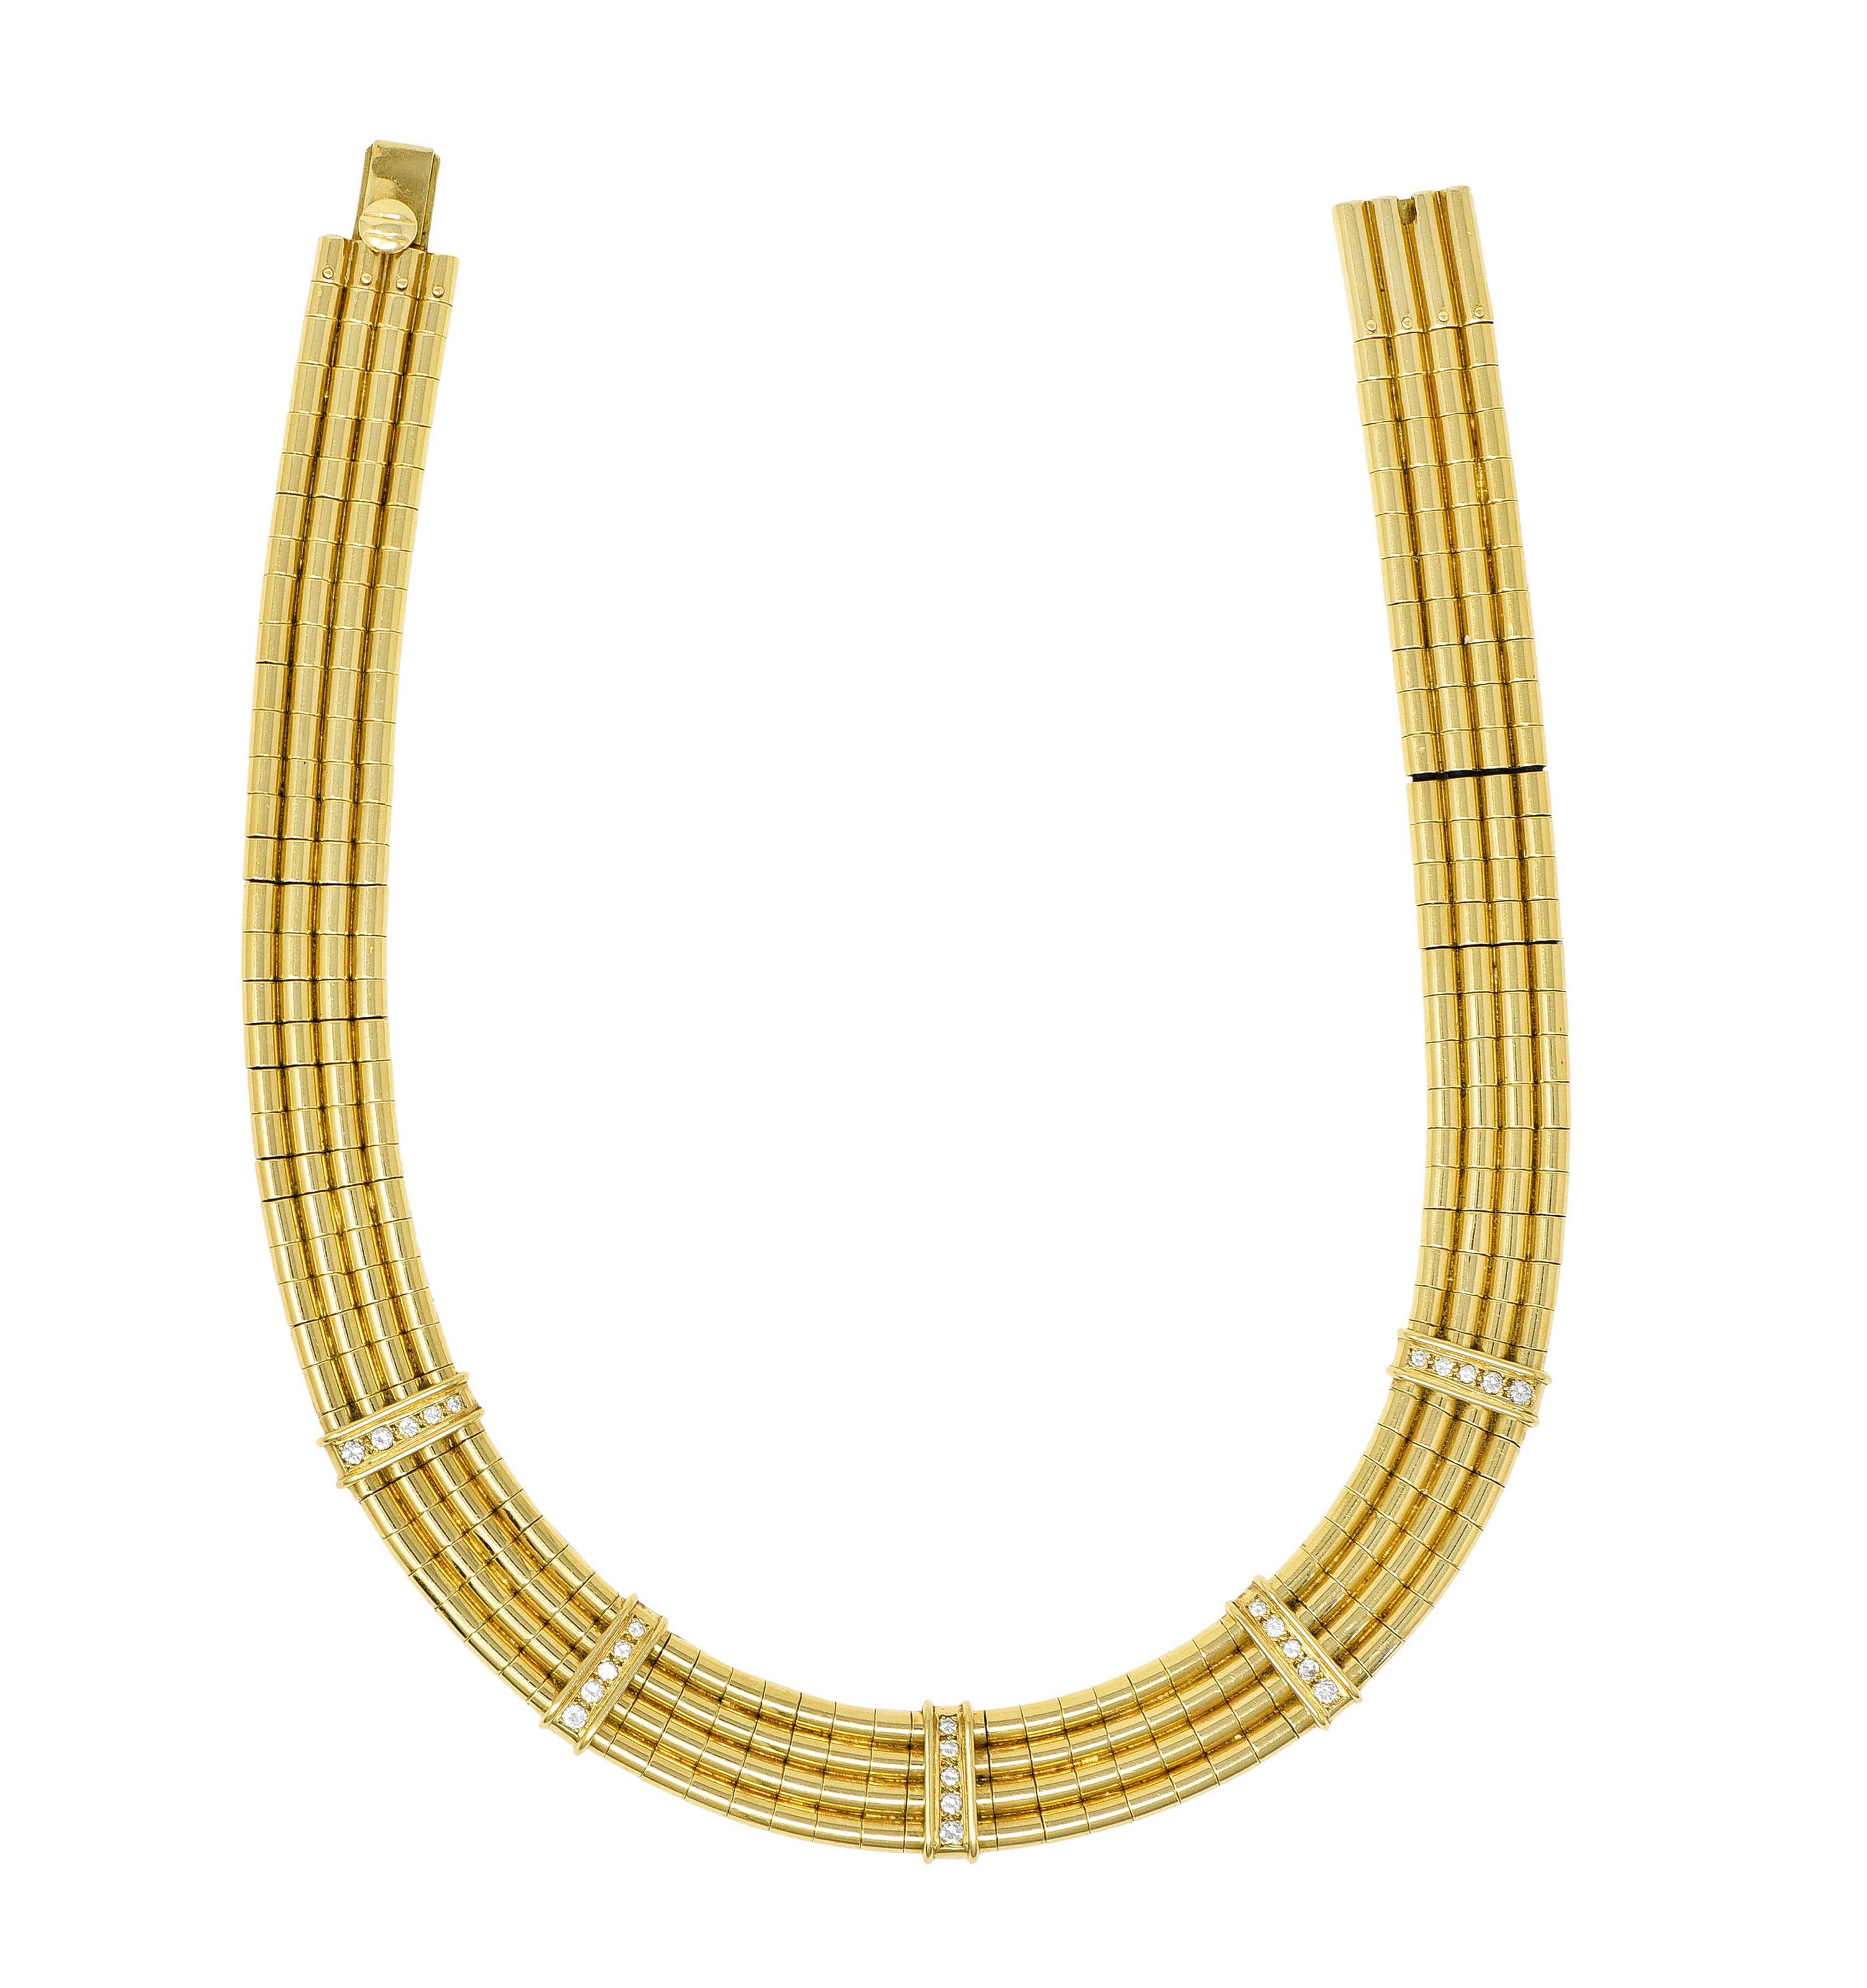 Collar necklace is designed as multiple strands threaded with deeply ridged barrel links

Featuring five linear stations accented by round brilliant cut diamonds - graduating in size

Weighing in total approximately 1.25 carats with G/H color and VS